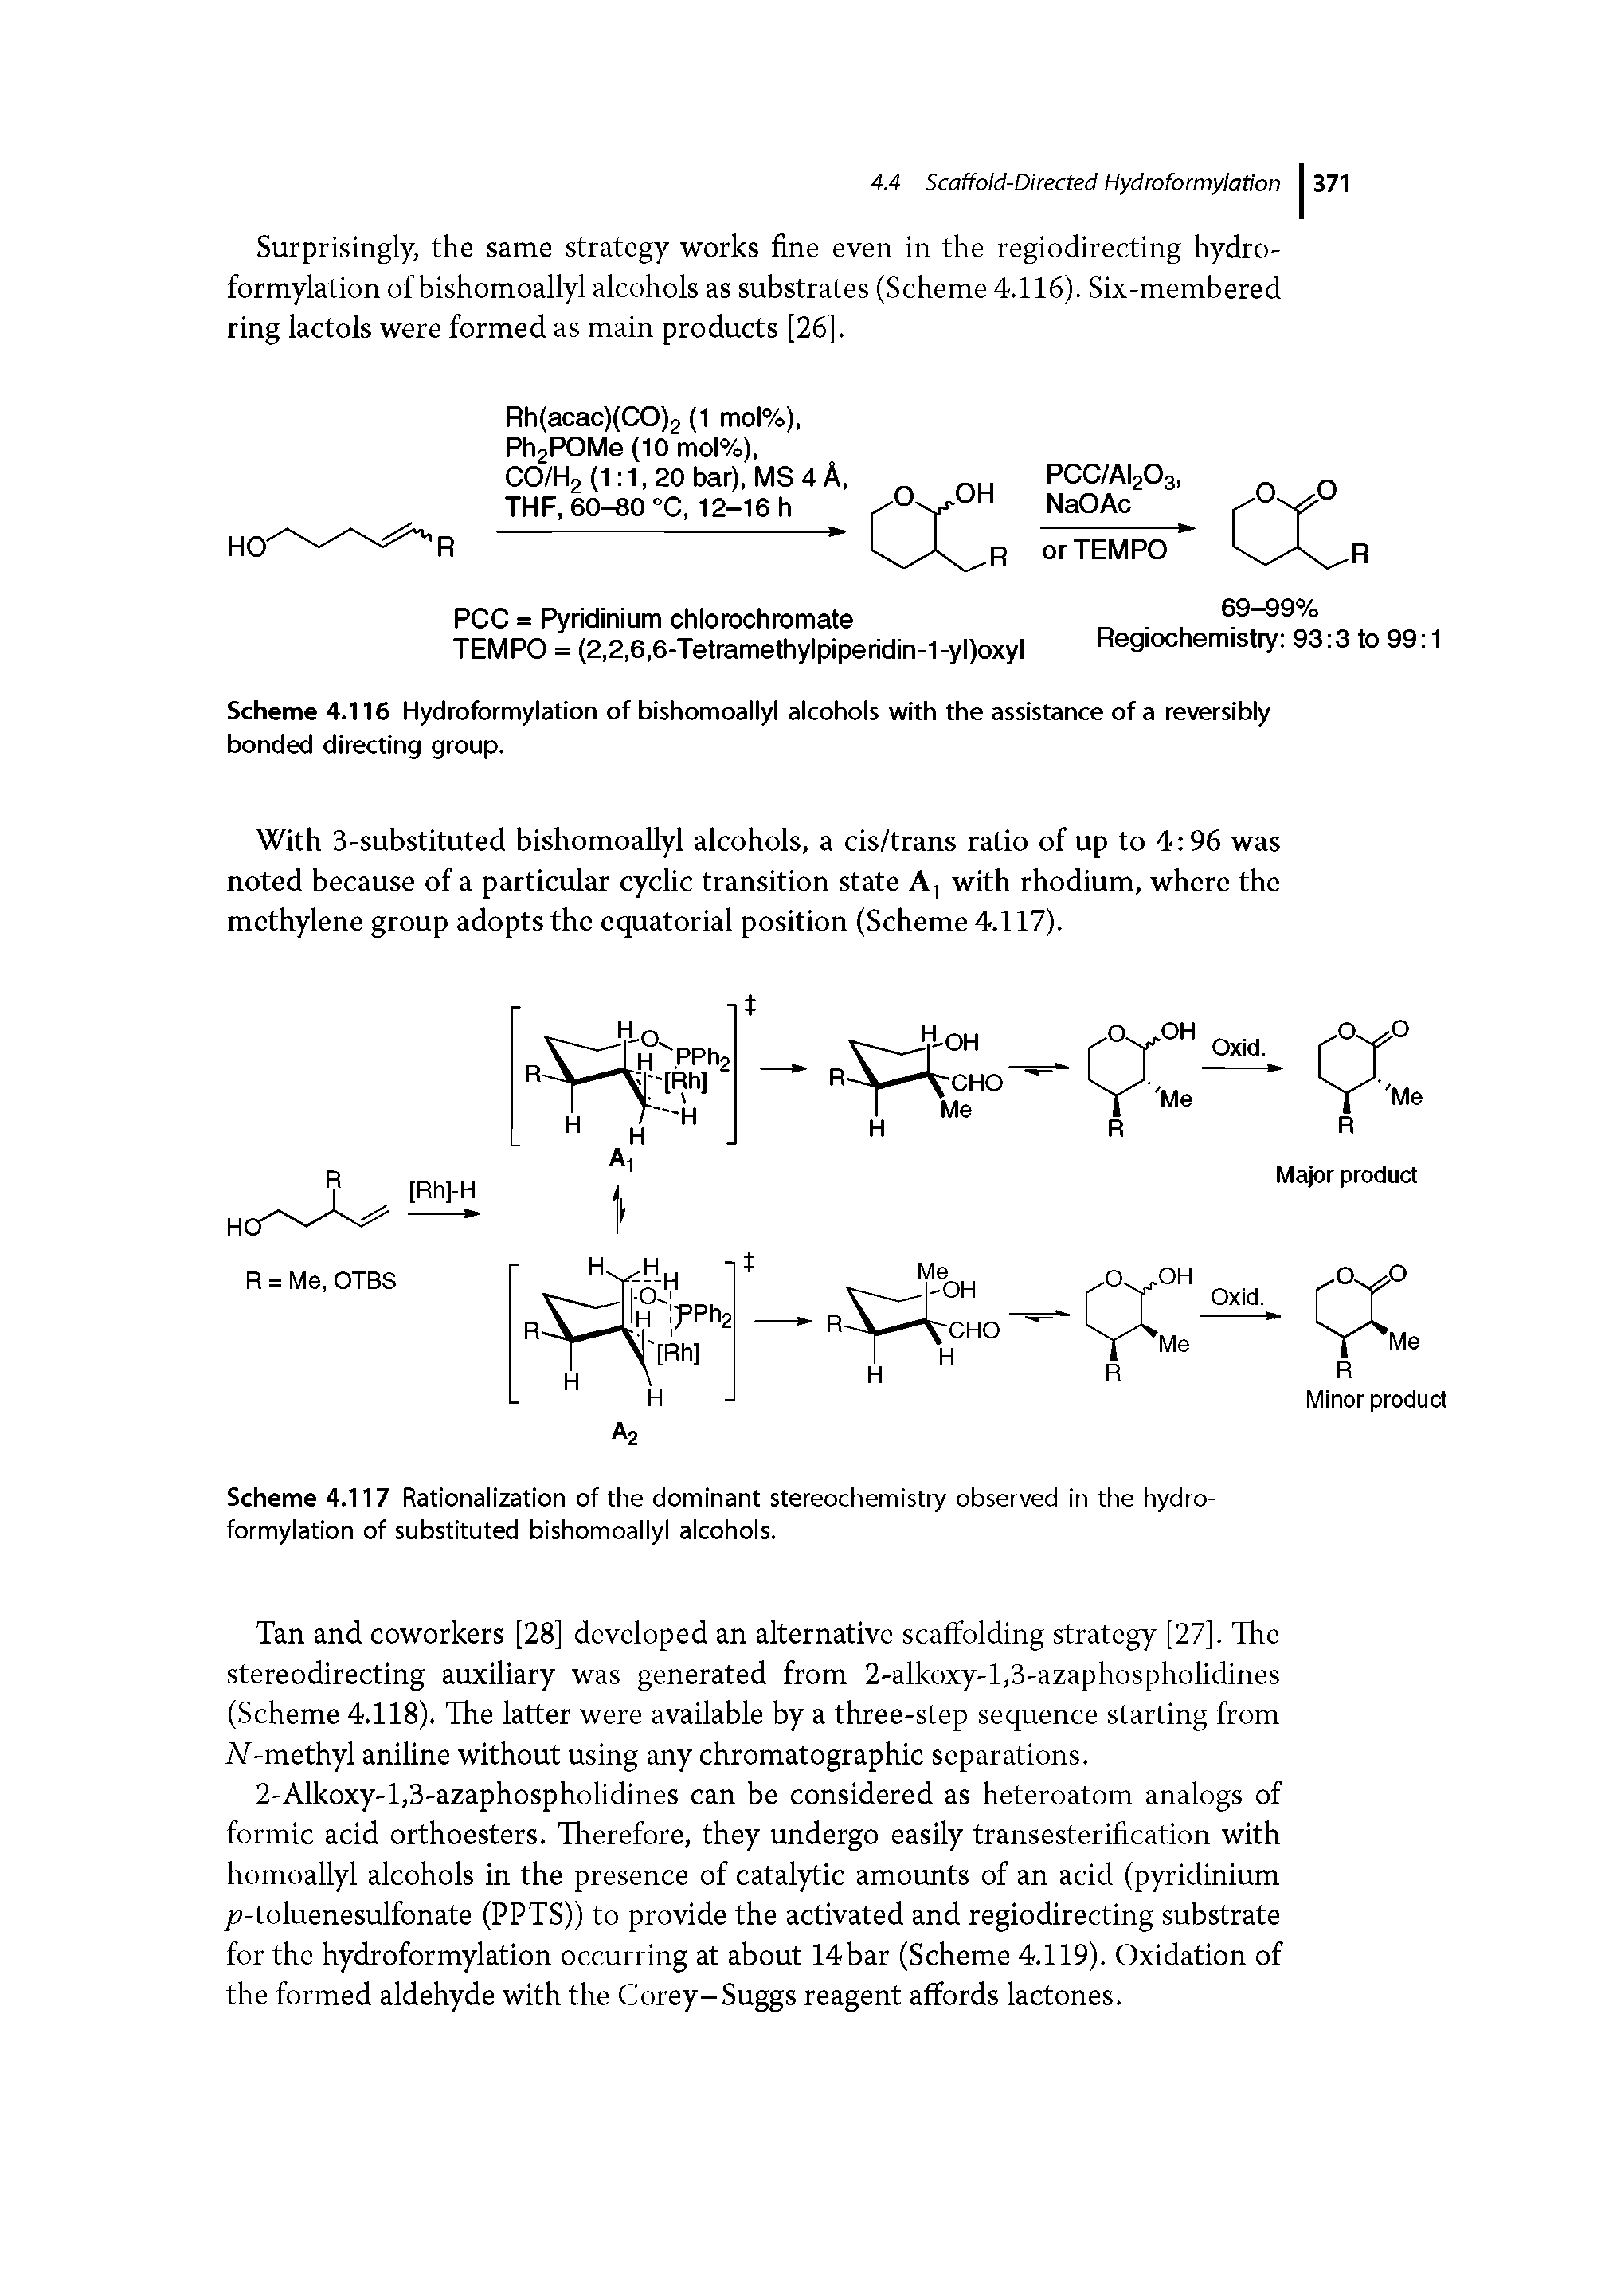 Scheme 4.117 Rationalization of the dominant stereochemistry observed in the hydroformylation of substituted bishomoallyl alcohols.